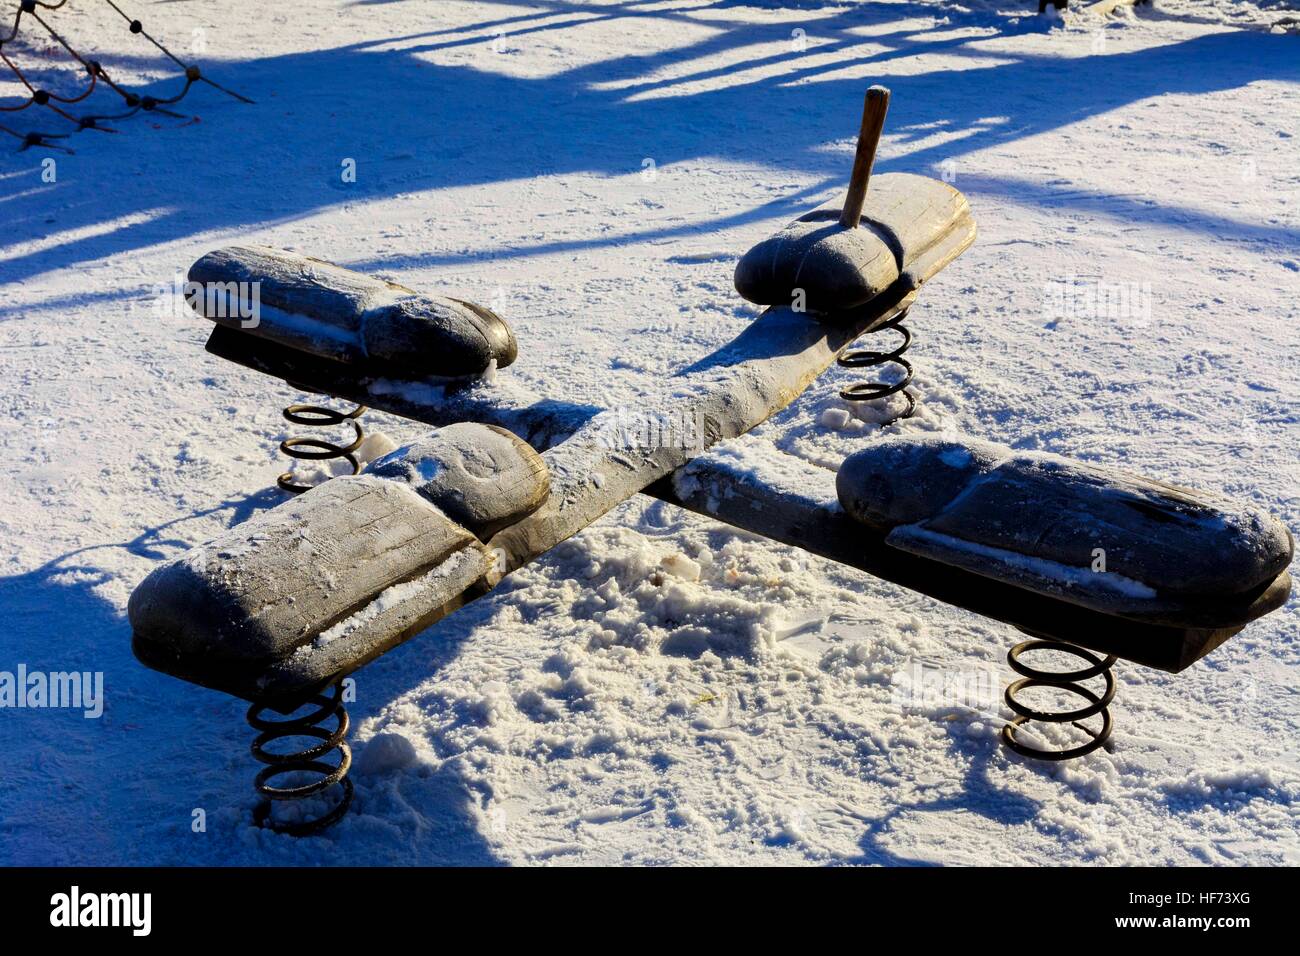 Children's swings and slides in the snow in the winter Stock Photo